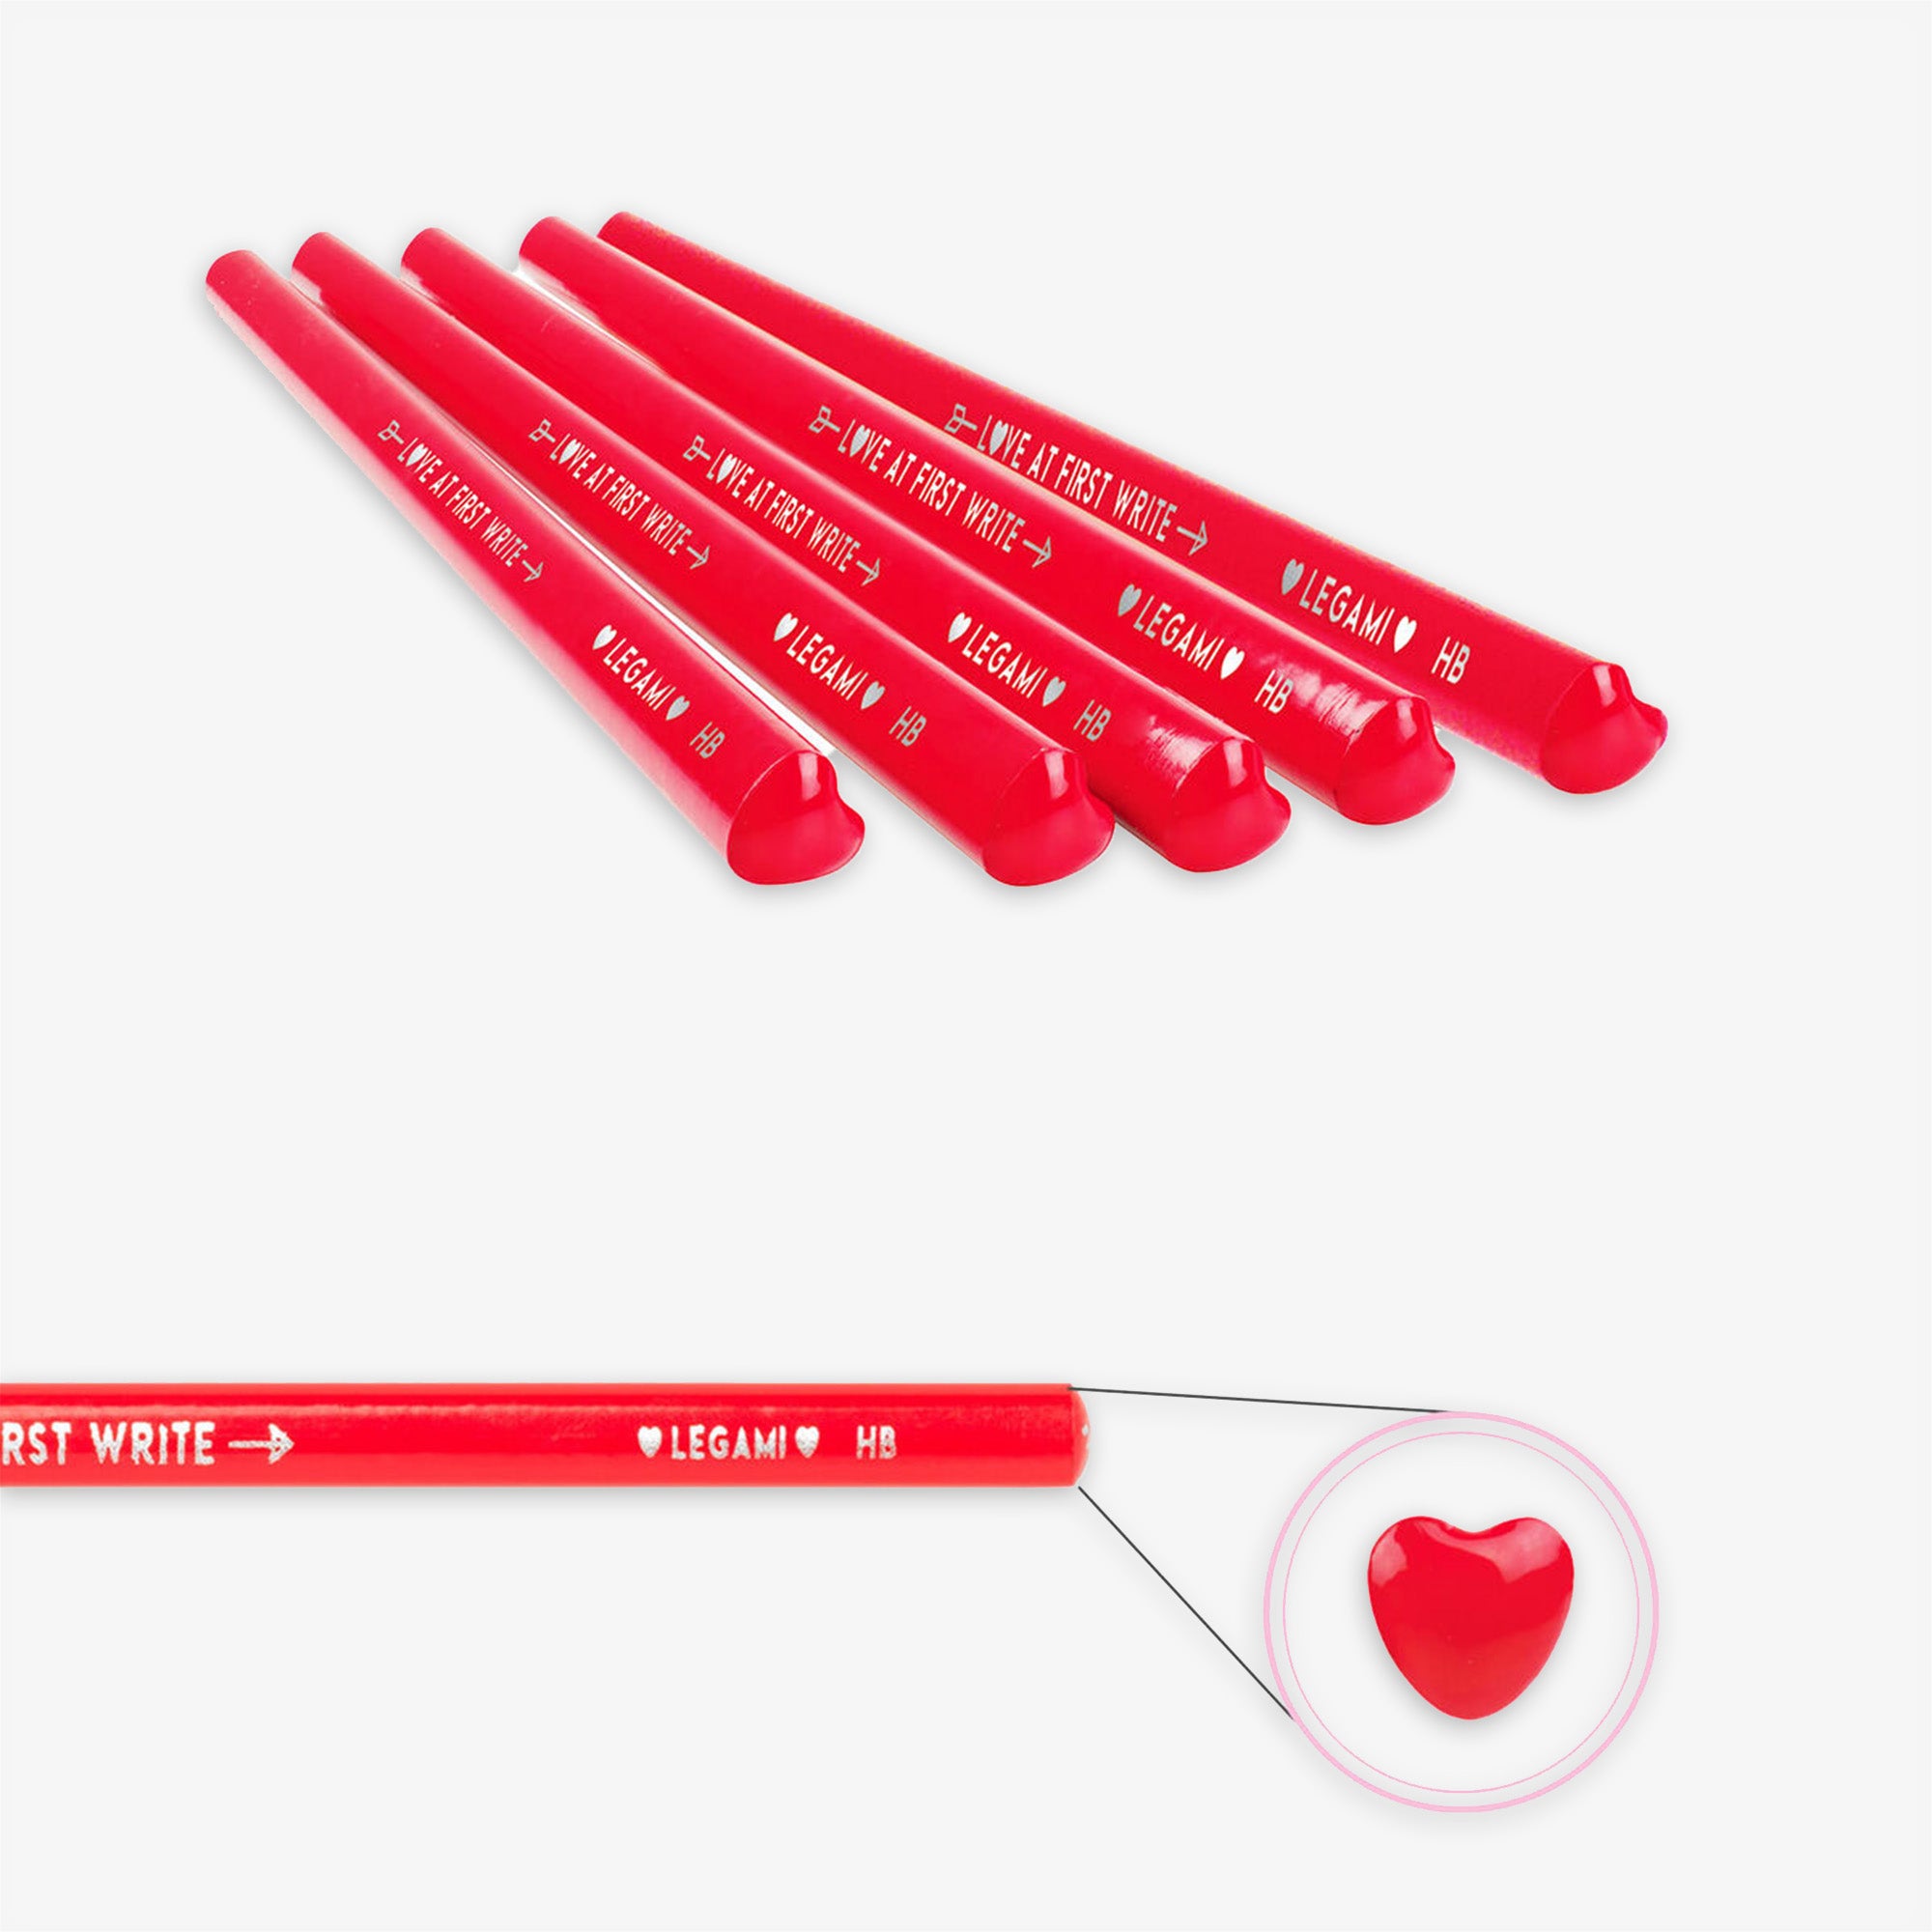 LOVE AT FIRST WRITE // HEART PENCIL